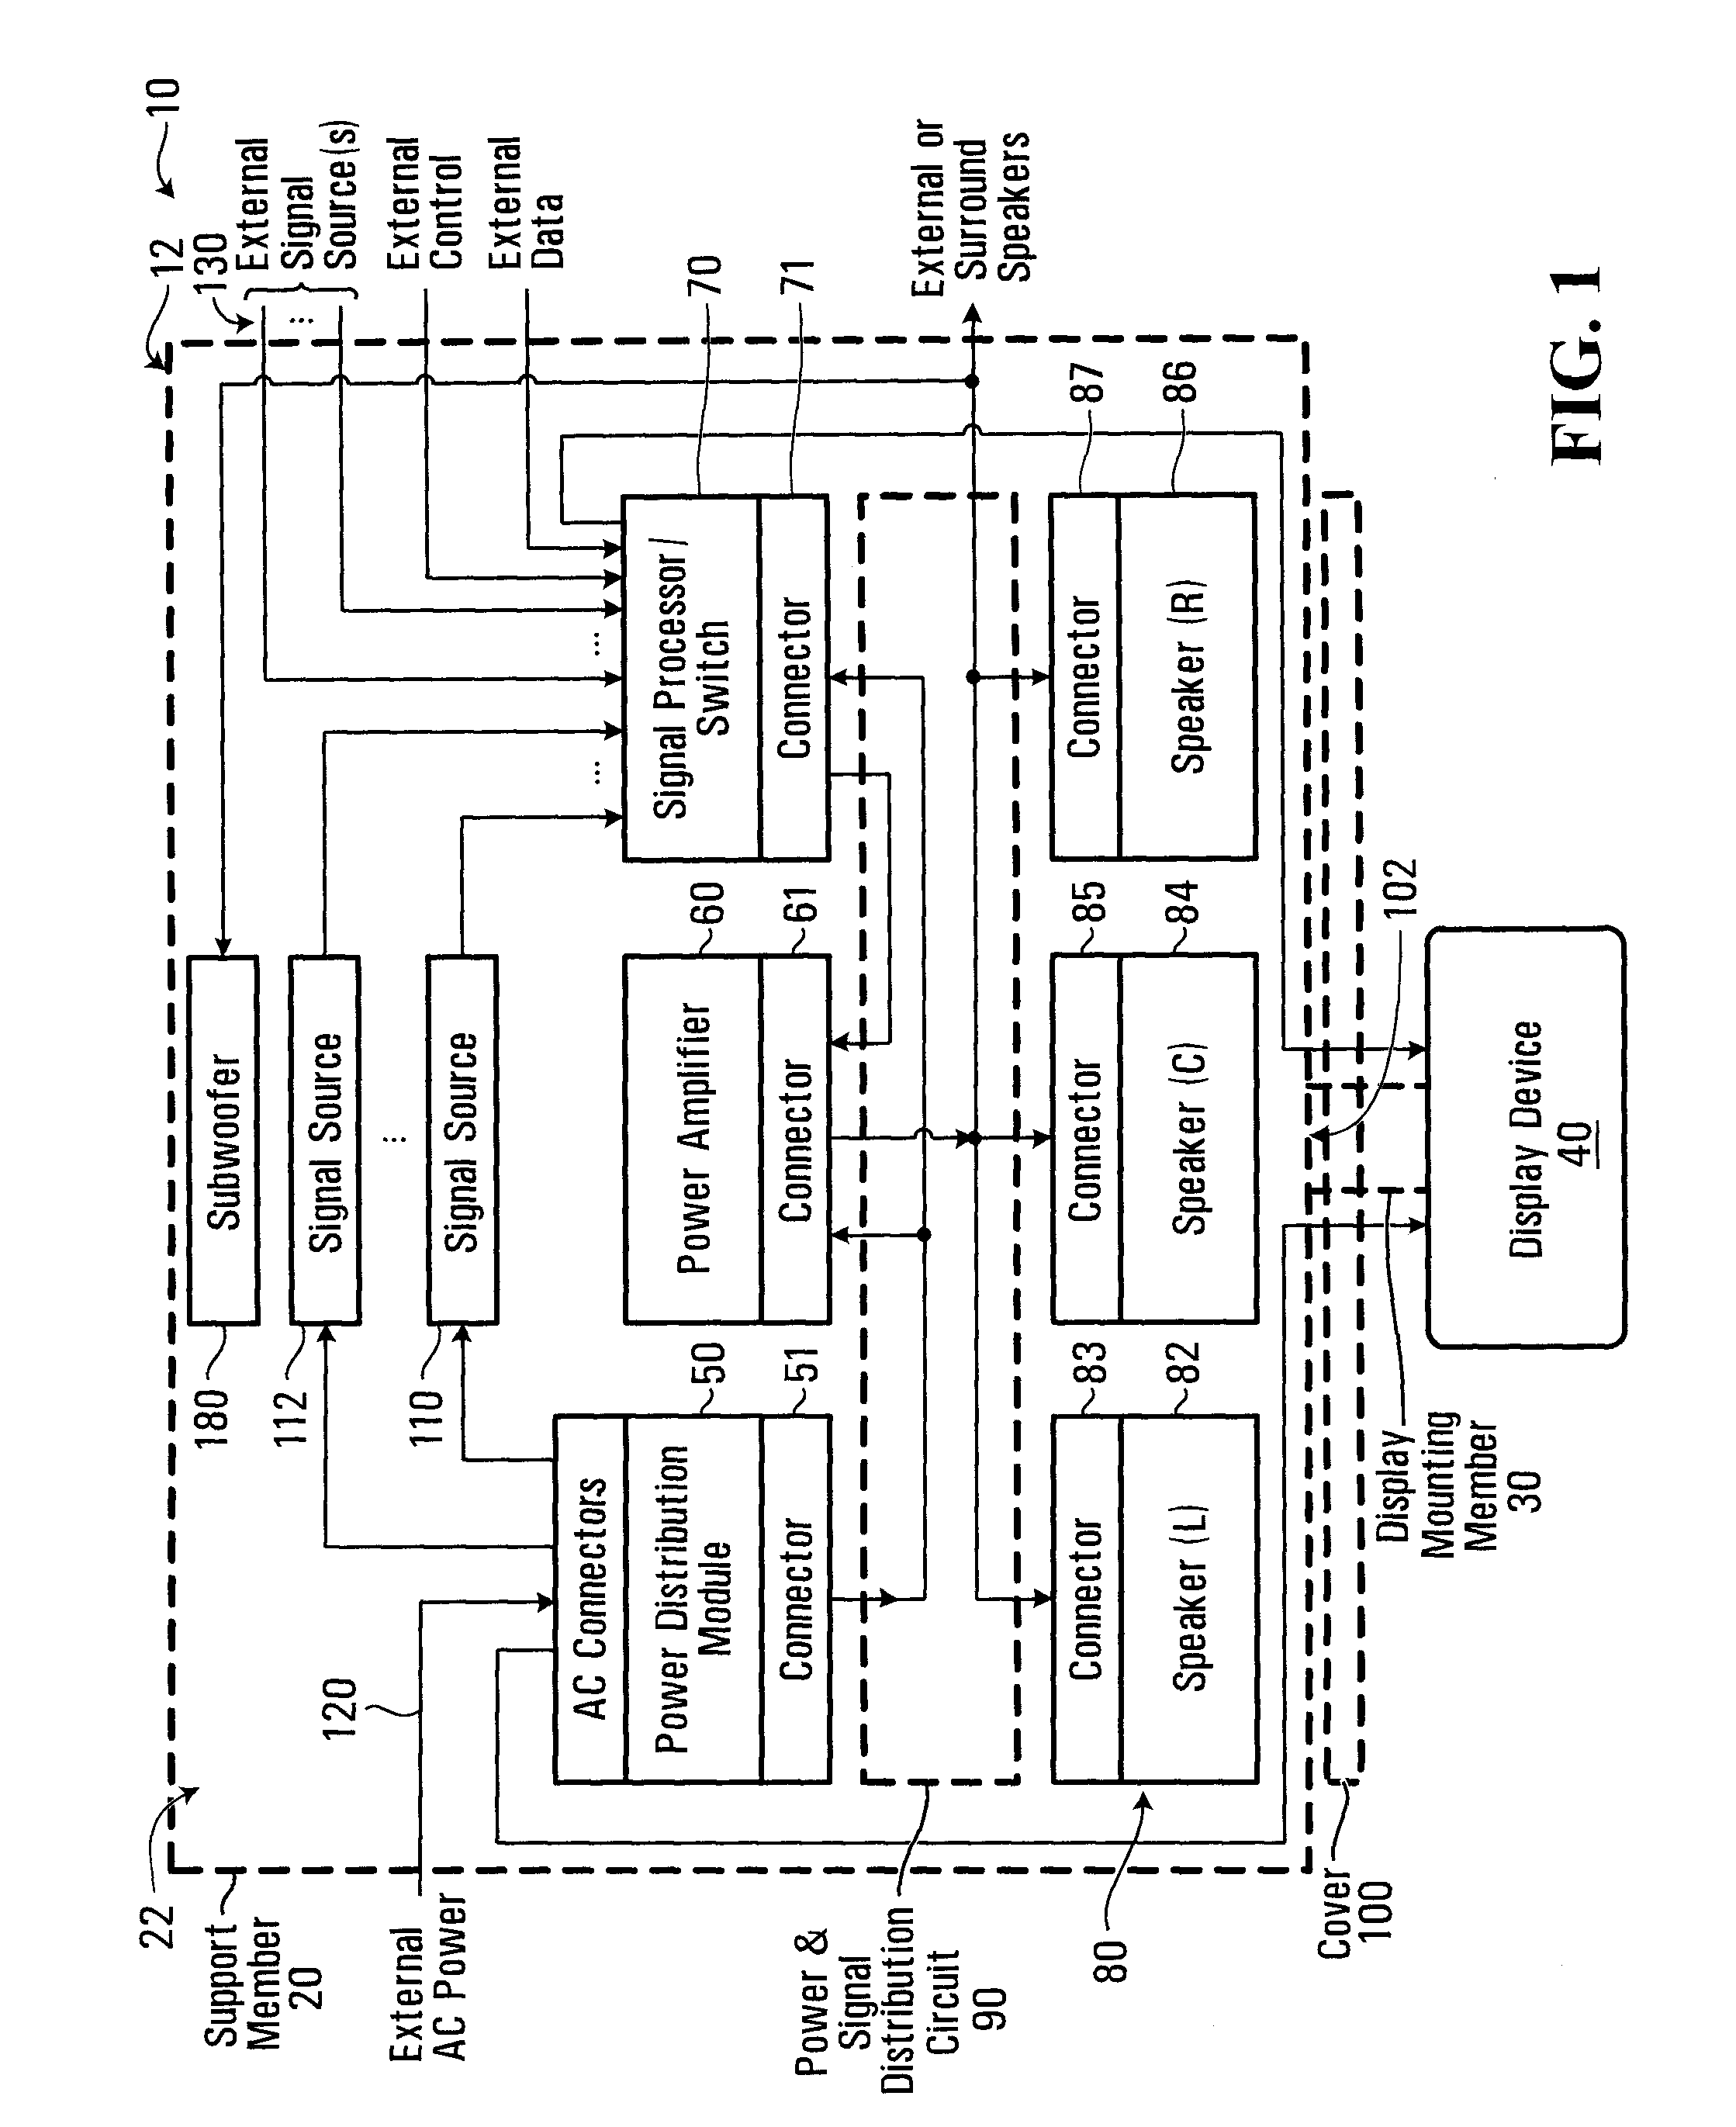 Mounting apparatus for an audio/video system and related methods and systems